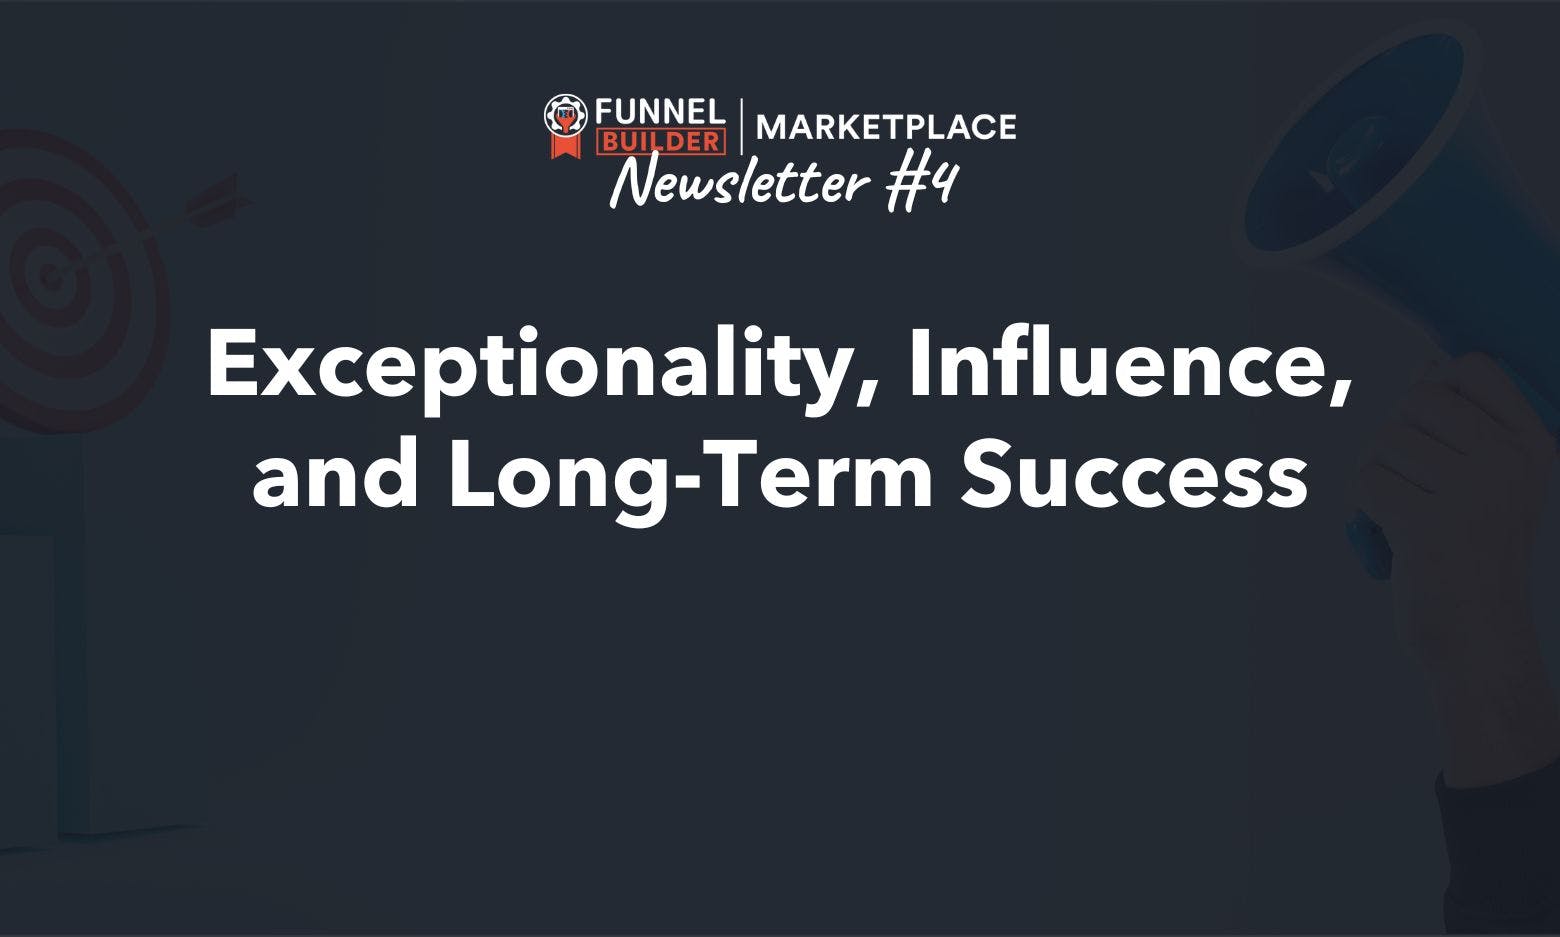 Newsletter #4: Exceptionality, Influence, and Long-Term Success